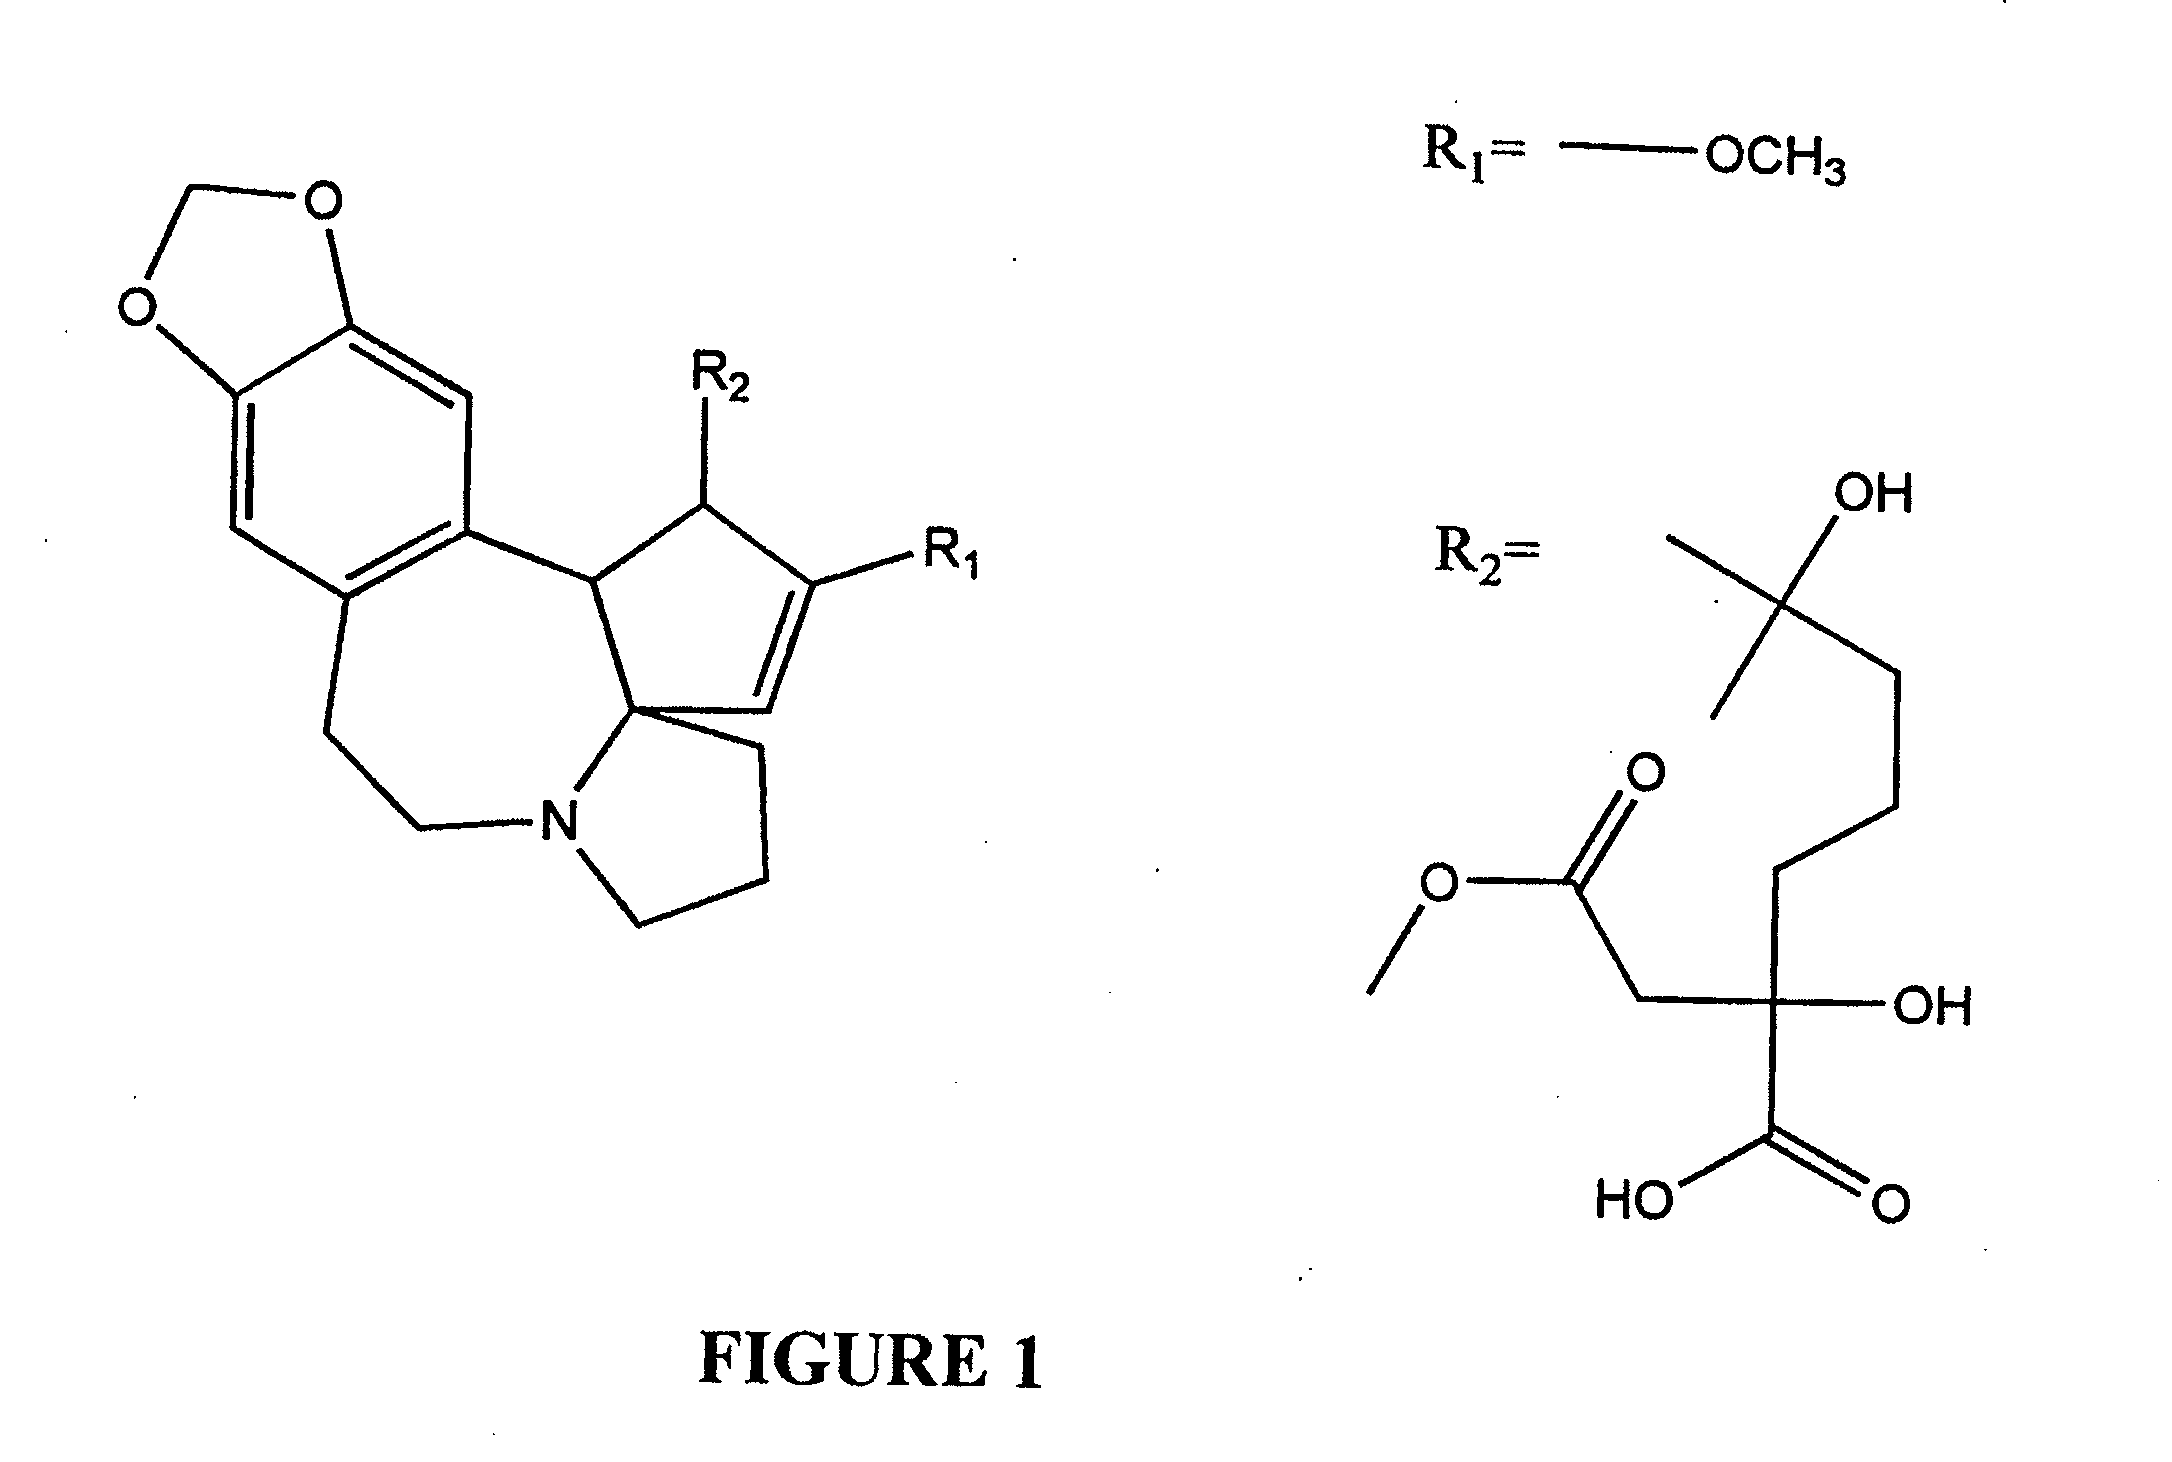 Cephalotaxine alkaloid compositions and uses thereof